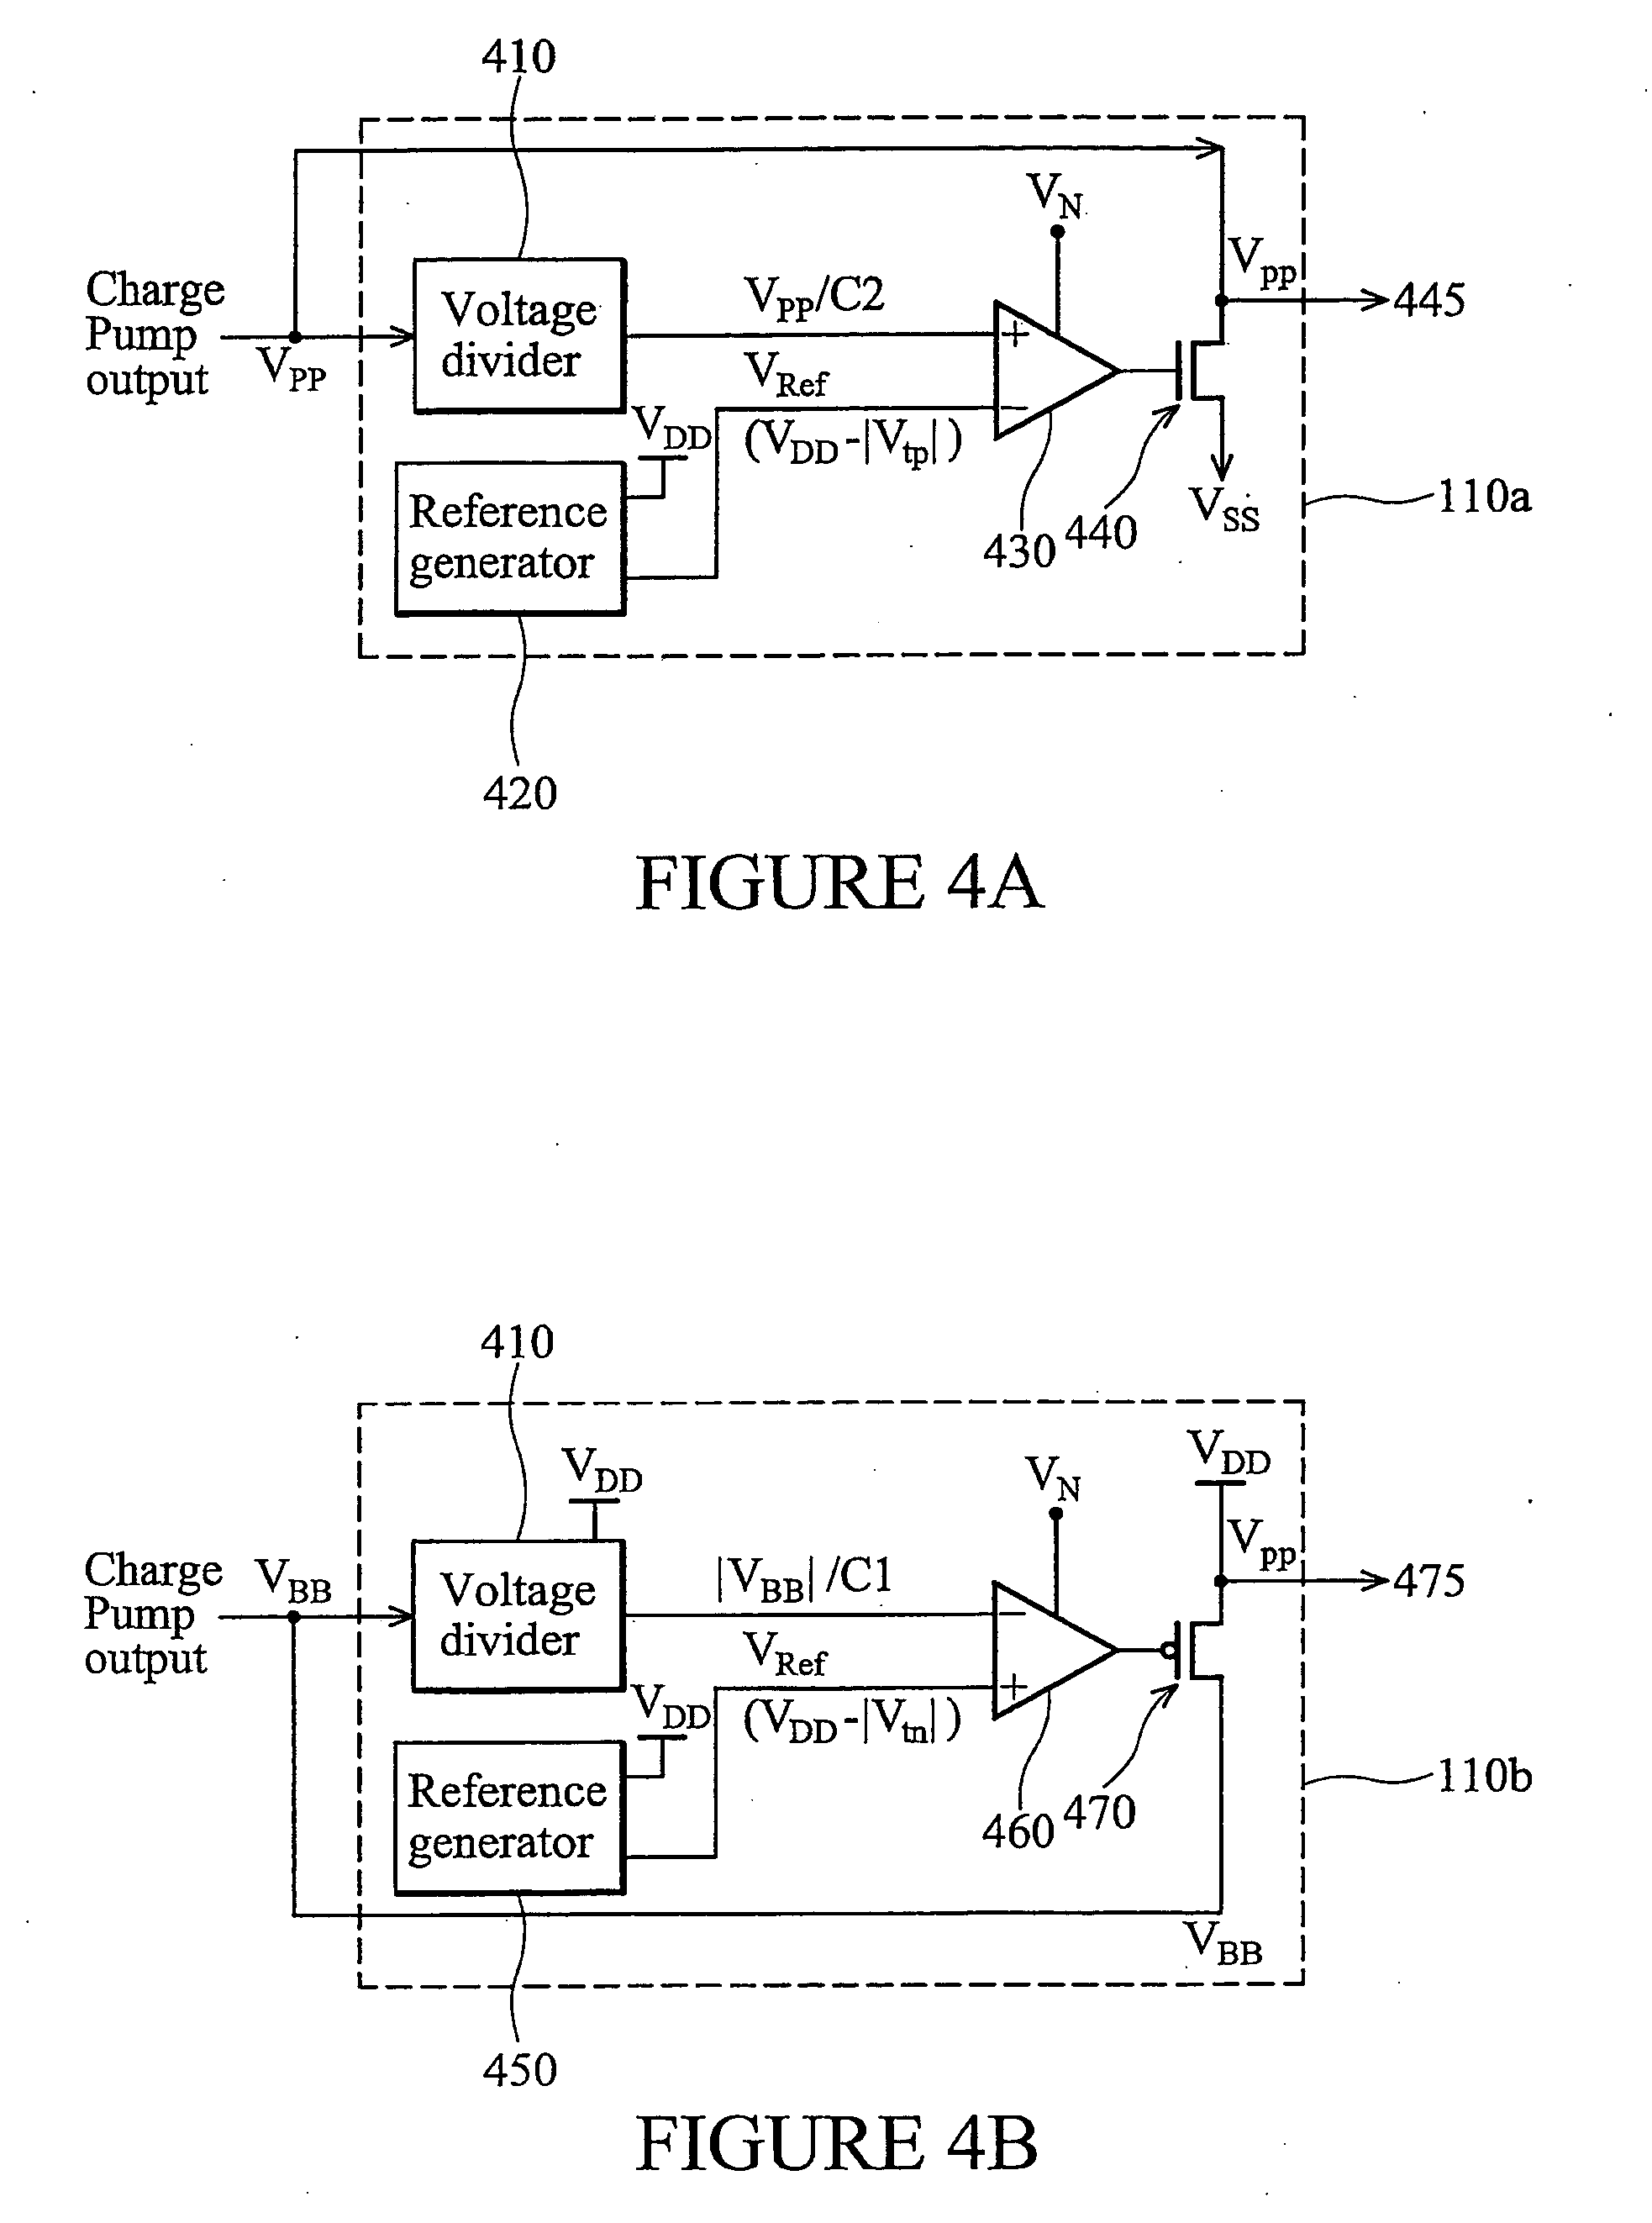 Back-bias voltage regulator having temperature and process variation compensation and related method of regulating a back-bias voltage